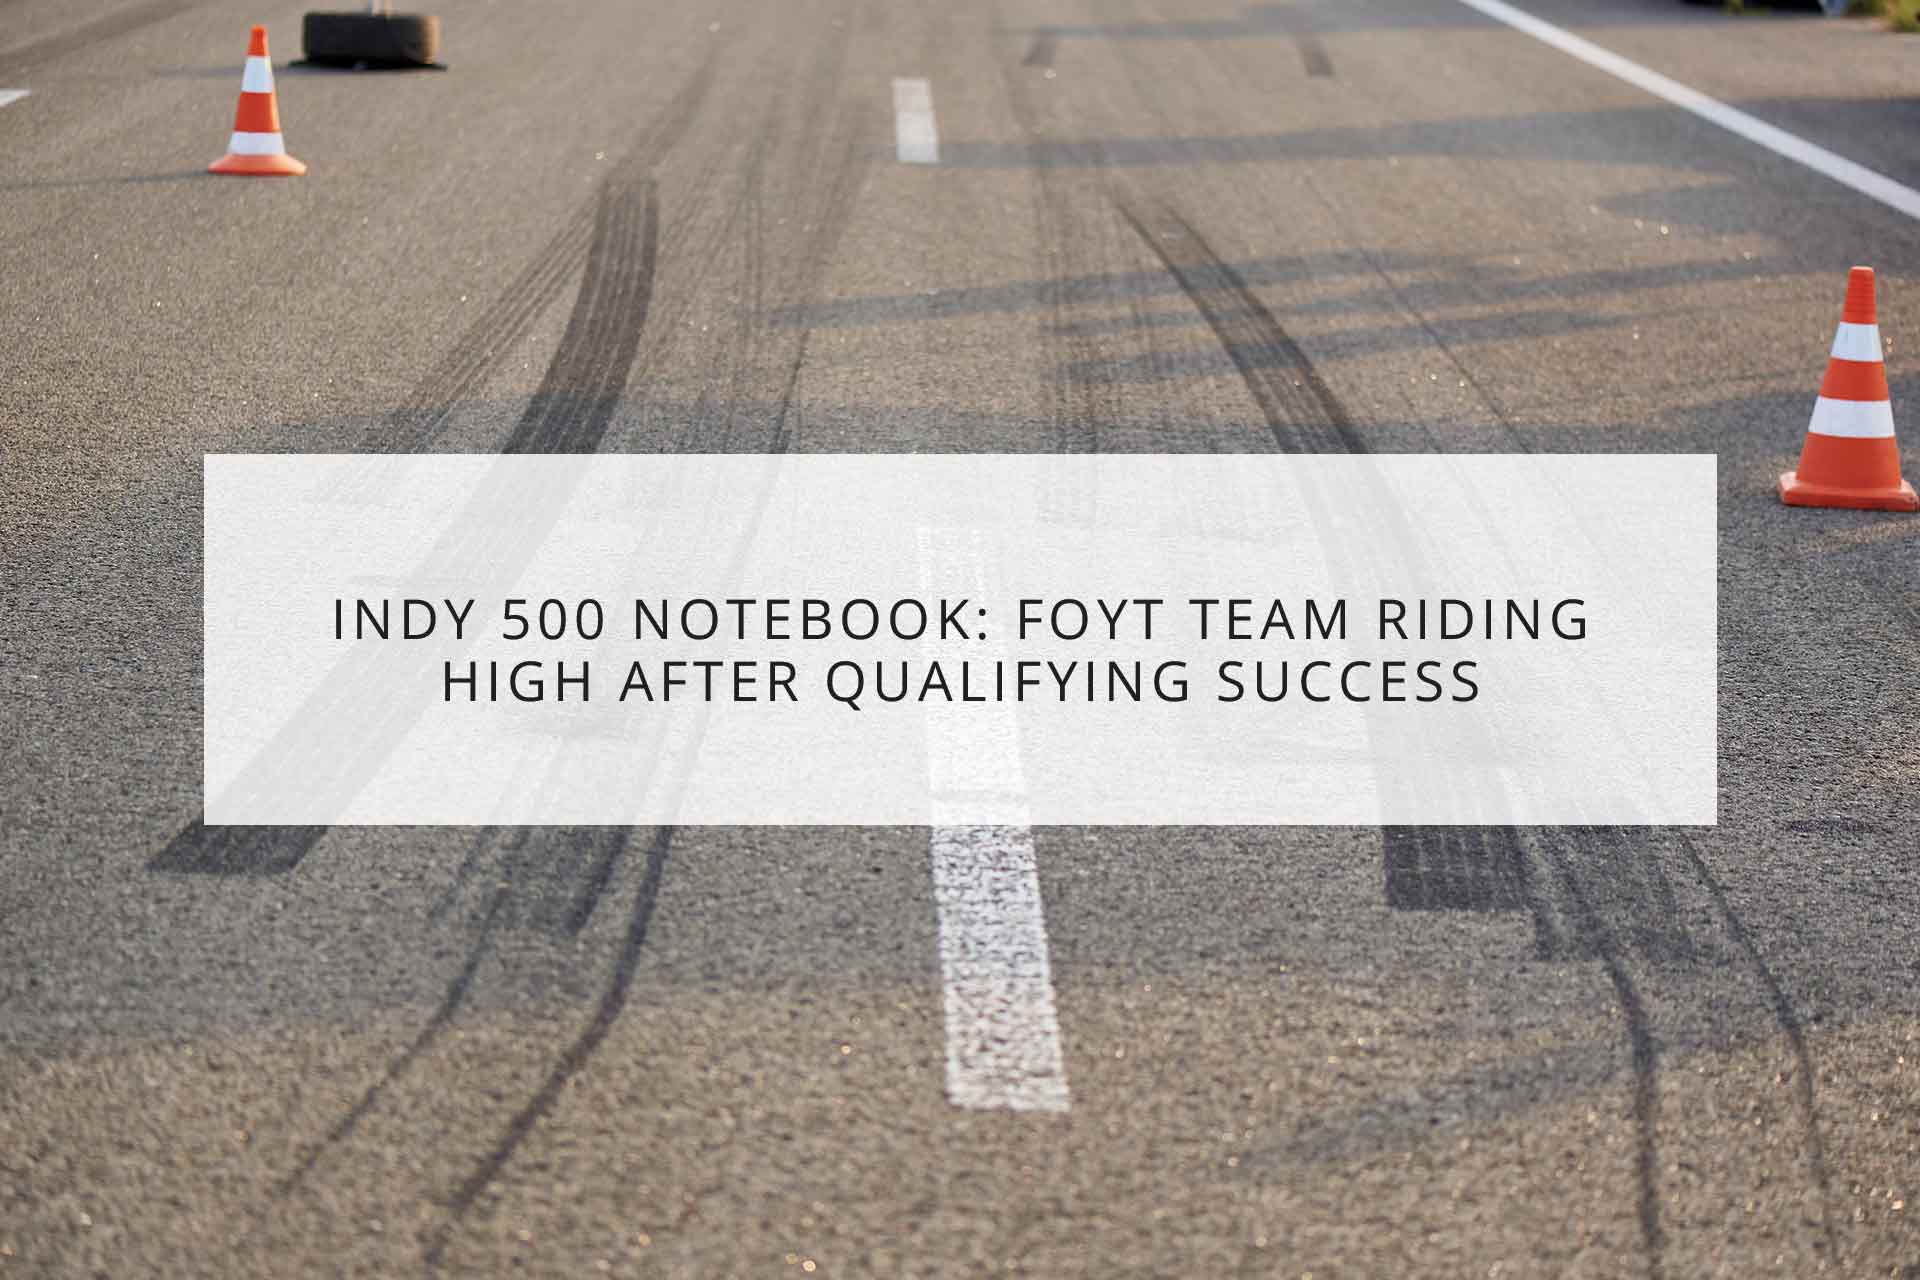 Indy 500 Notebook: Foyt Team Riding High After Qualifying Success | Santino Ferrucci